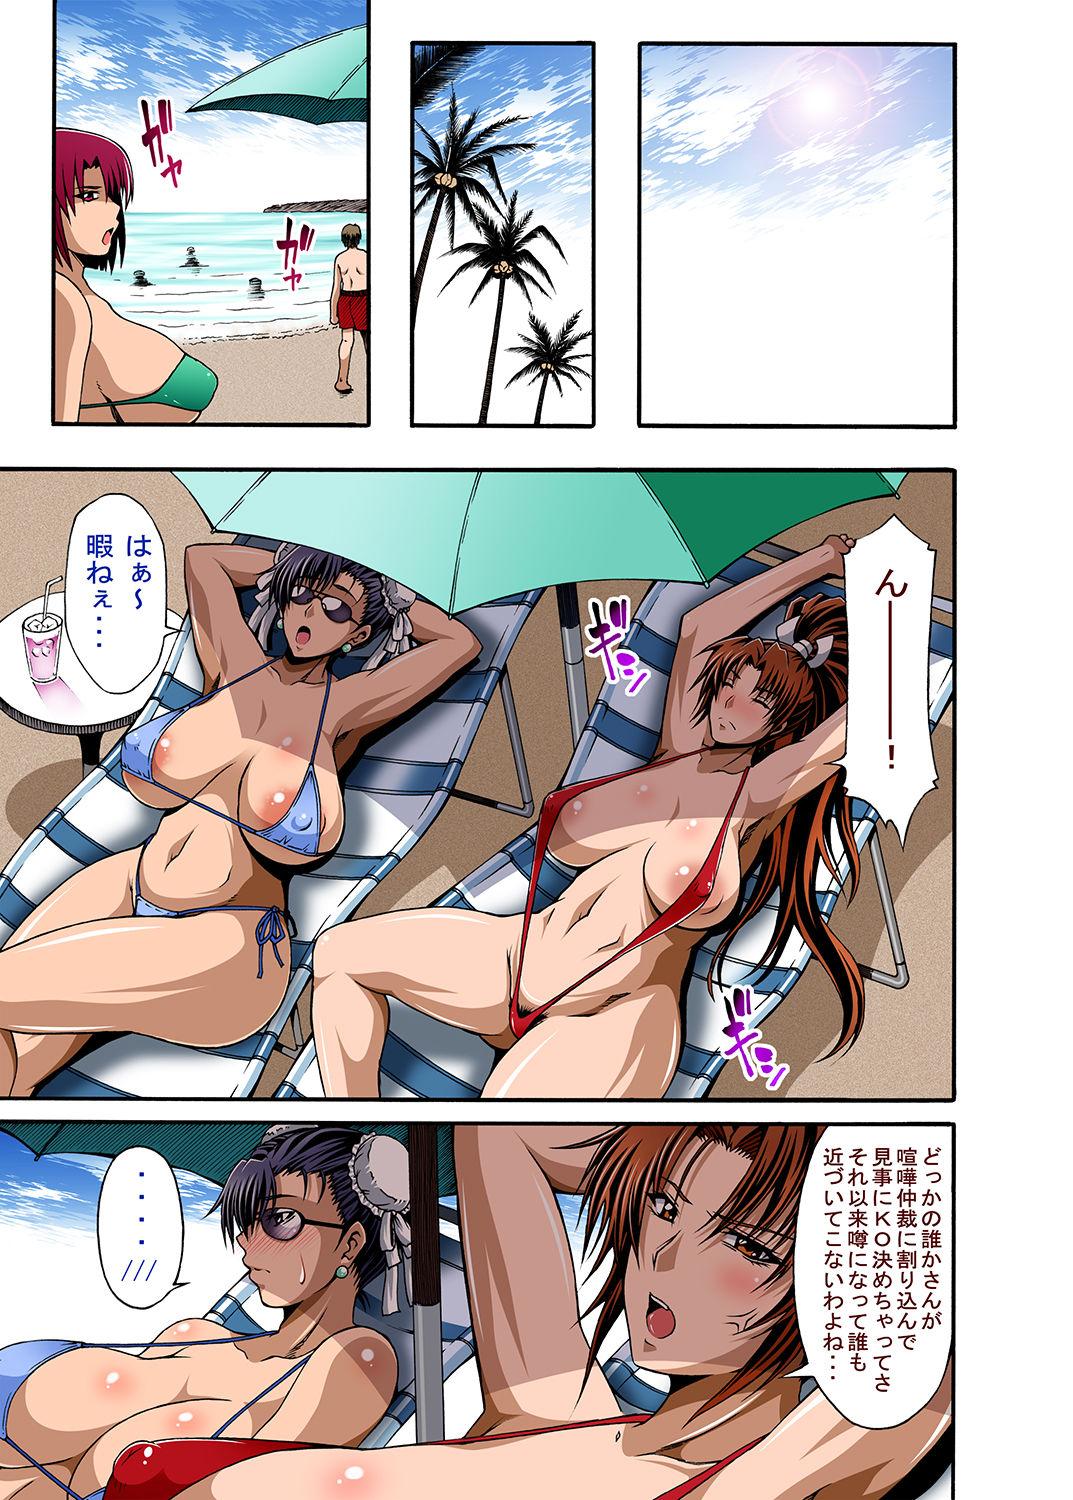 Playing Nipponichi Choroi Onna to Masegaki - Street fighter King of fighters Puba - Page 3